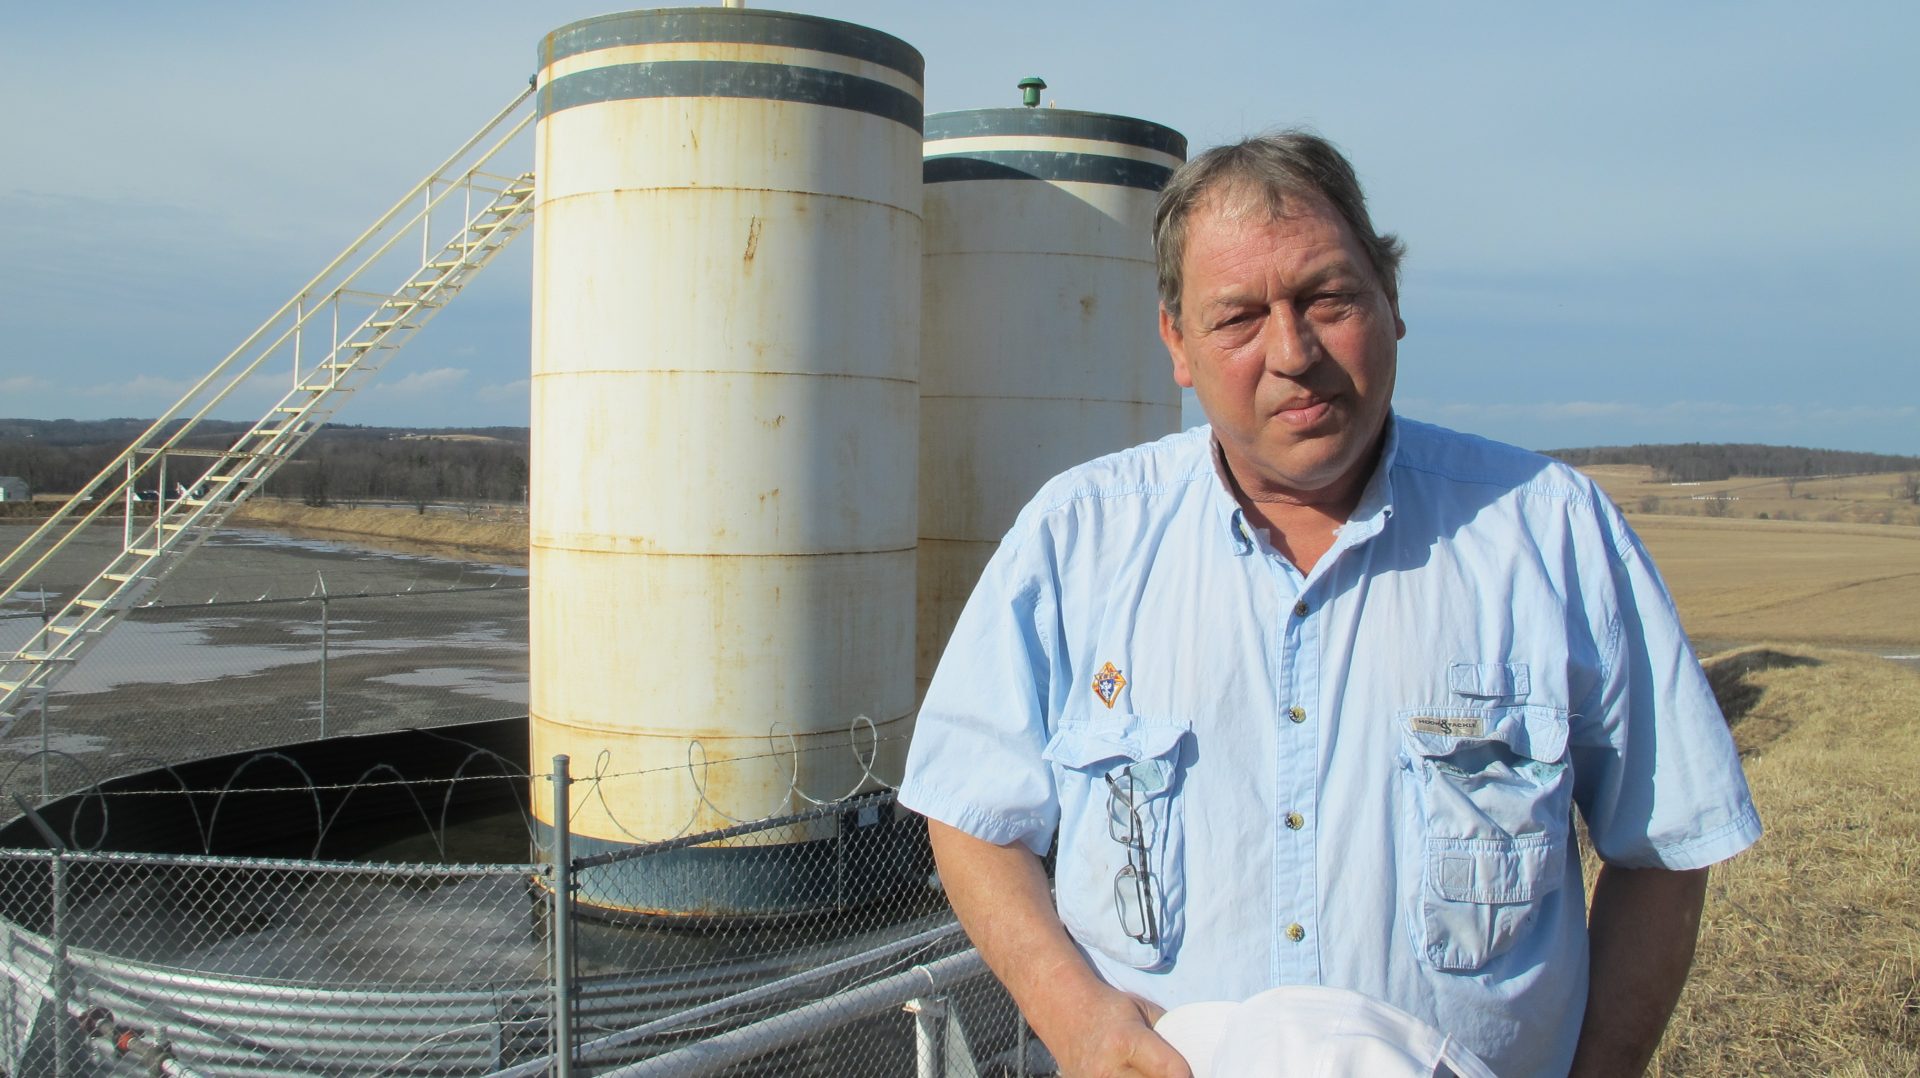 Jim Barrett stands next to a wellpad on his farm in Bradford County. He says Chesapeake Energy, which drilled four natural gas wells on his land, is cheating him out of royalty money. He is part of a class-action lawsuit against the company, which is separate from a case involving Chesapeake that's being pursued by the state Attorney General.